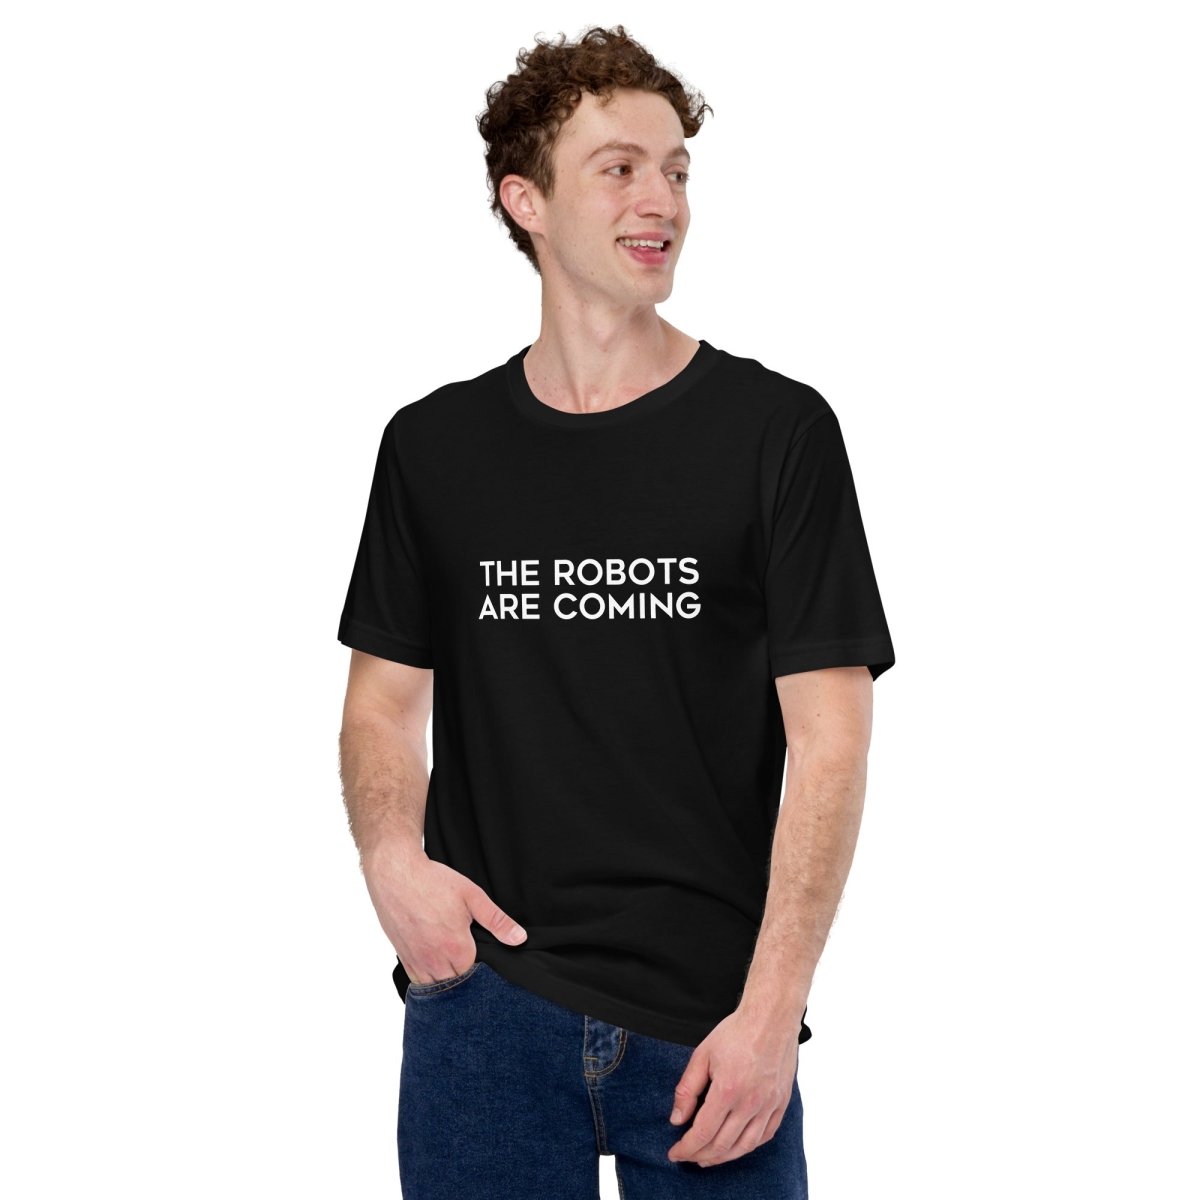 The Robots Are Coming T - Shirt 1 (unisex) - Black - AI Store